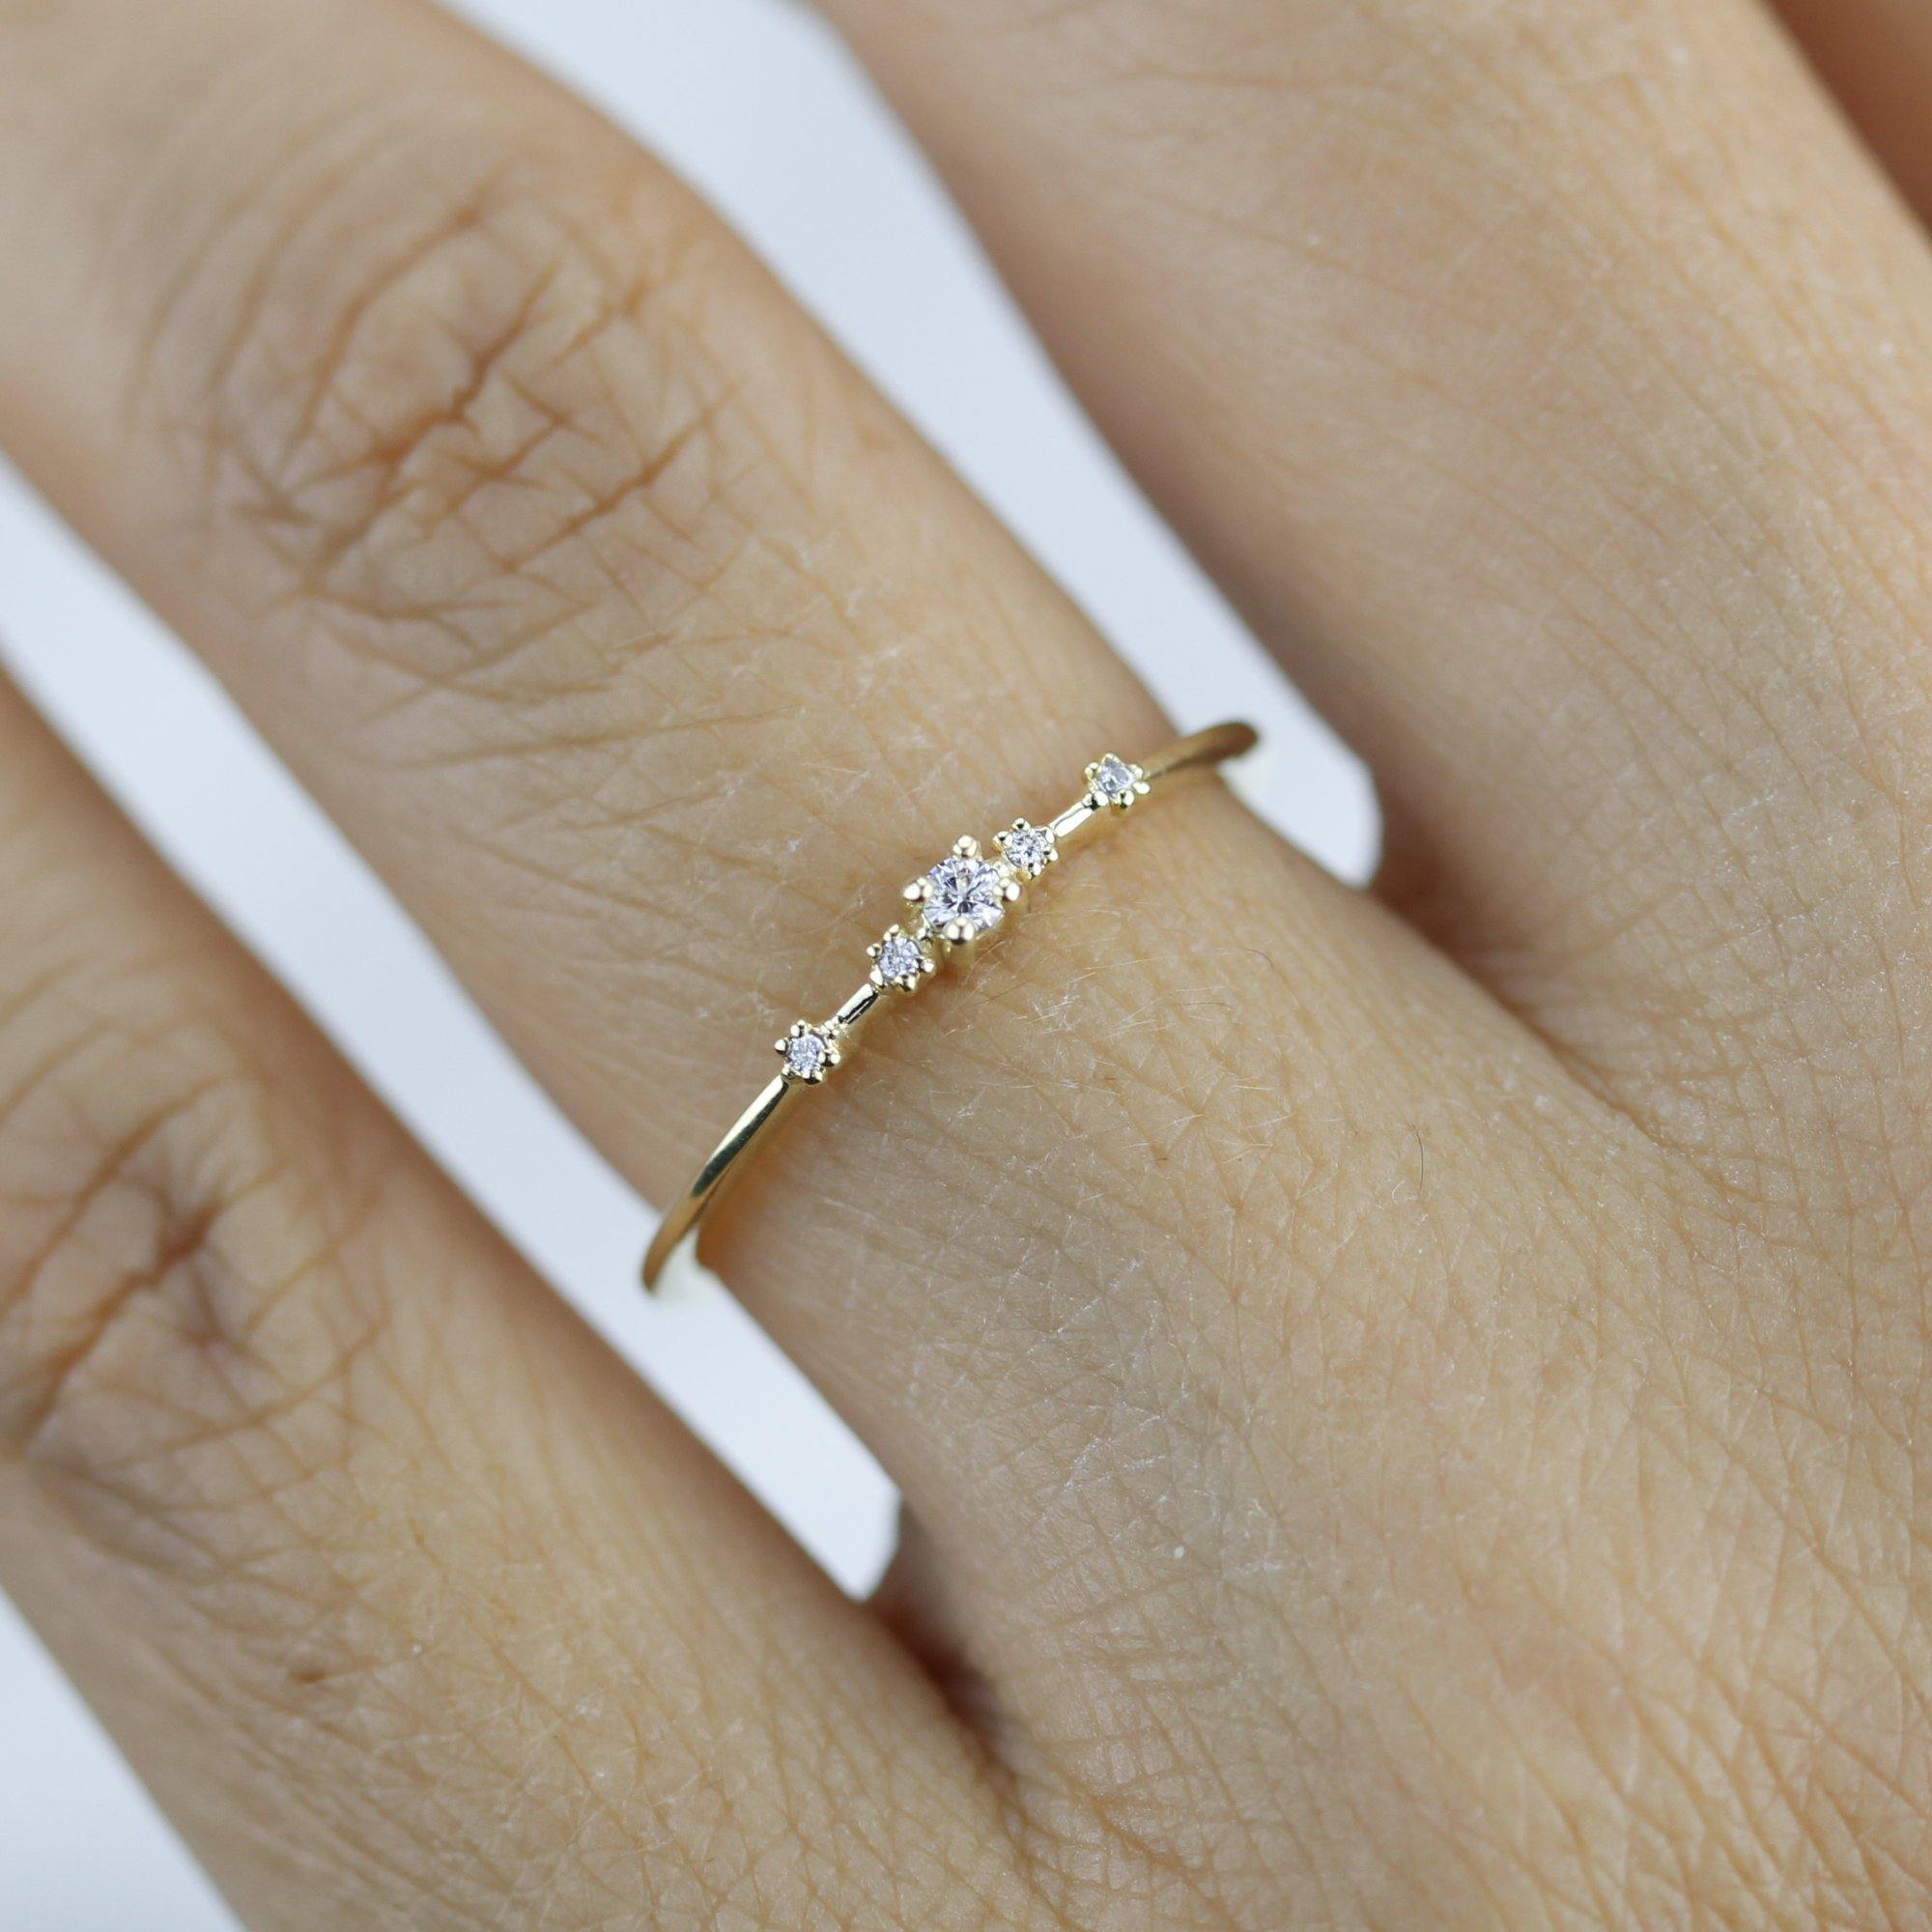 Simple engagement ring, engagement rings for women, minimalist – JEWELRY